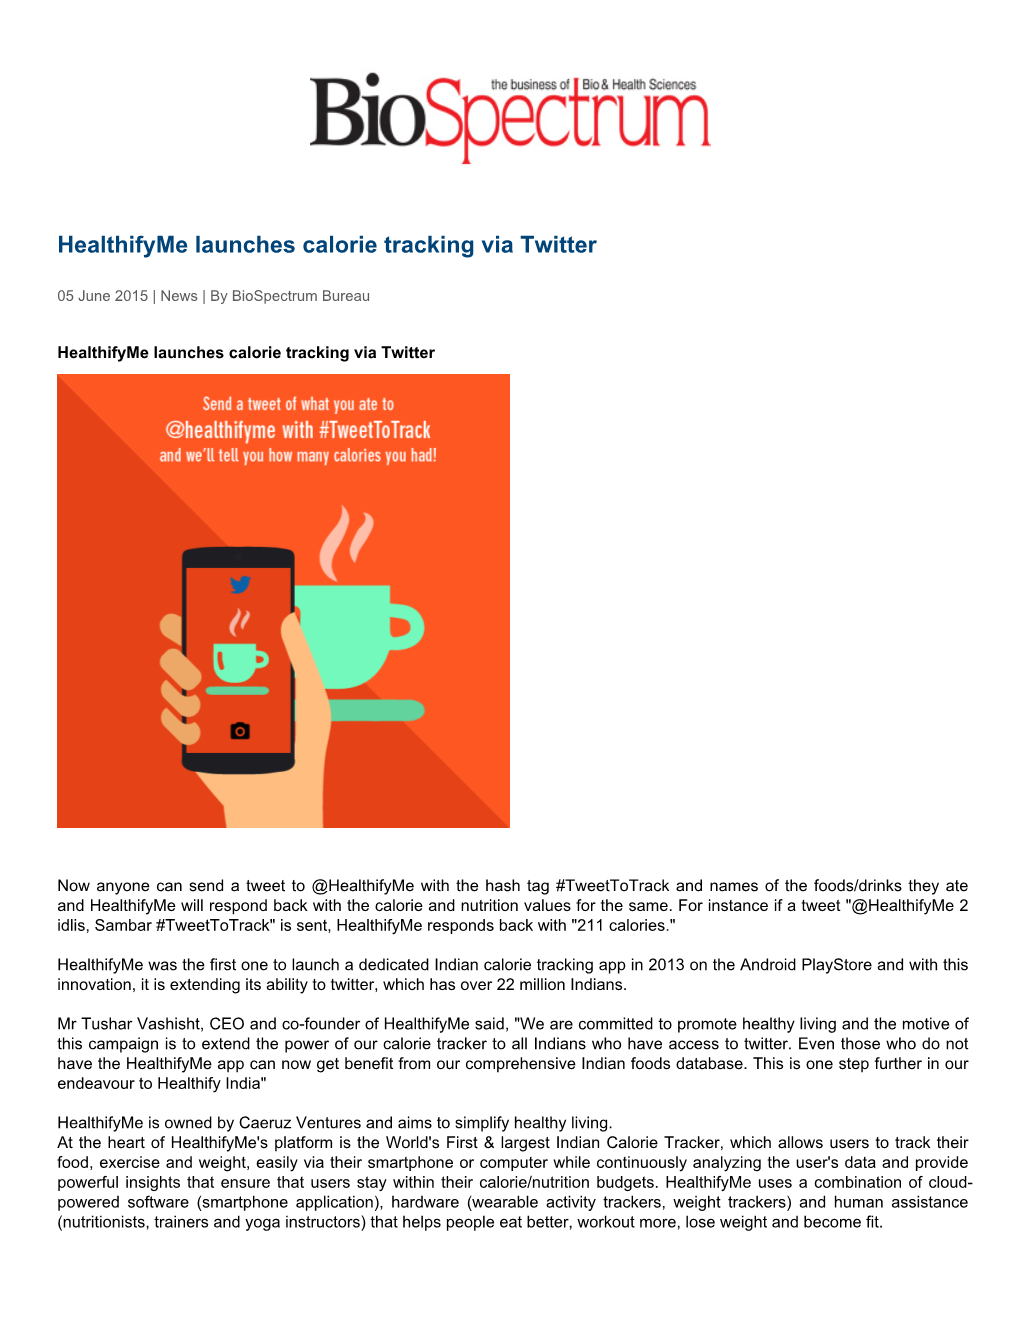 Healthifyme Launches Calorie Tracking Via Twitter